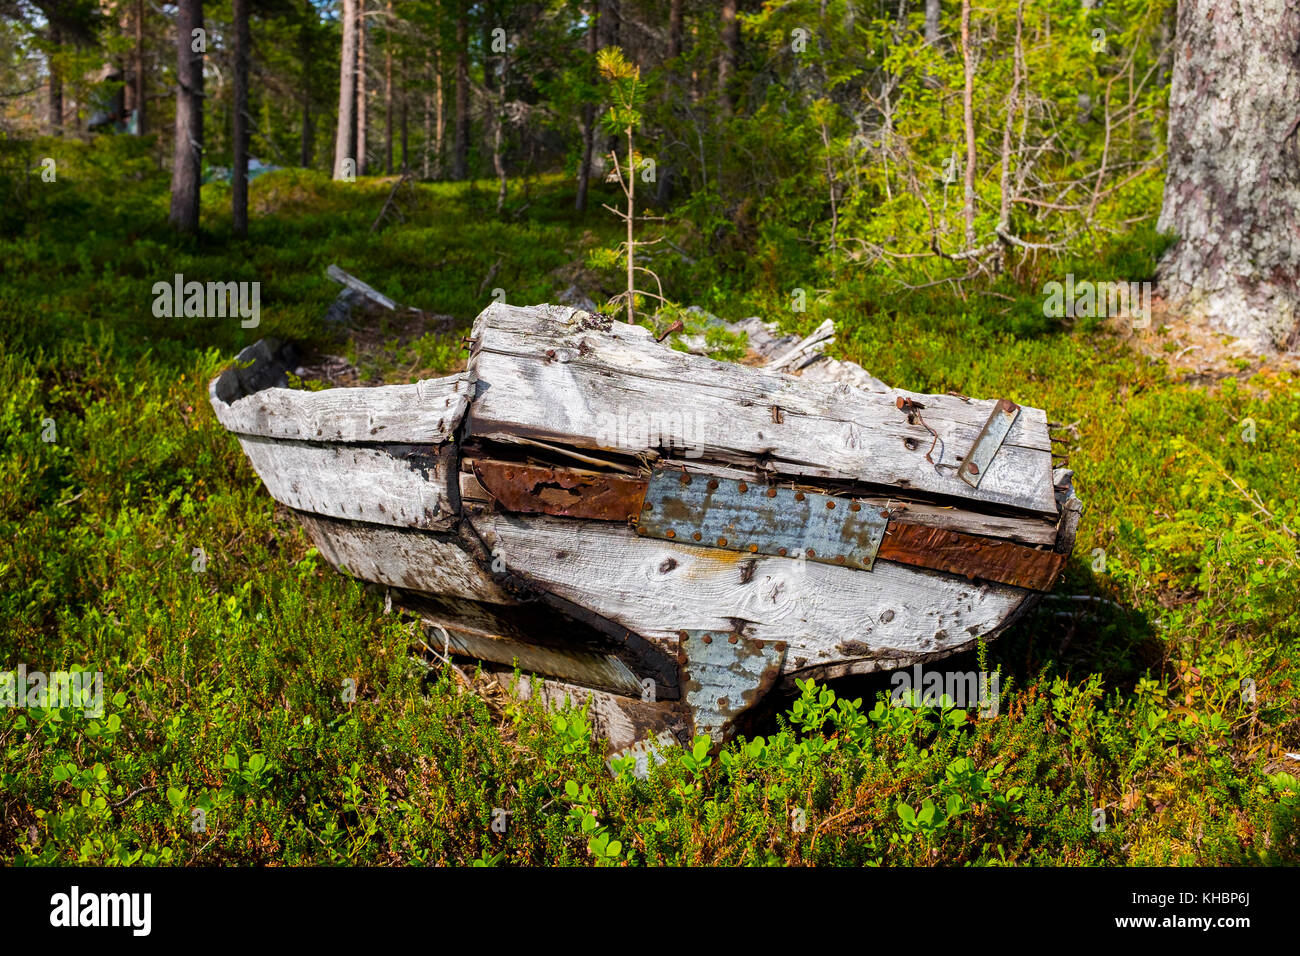 A abandoned raft in the woods in northern sweden Stock Photo